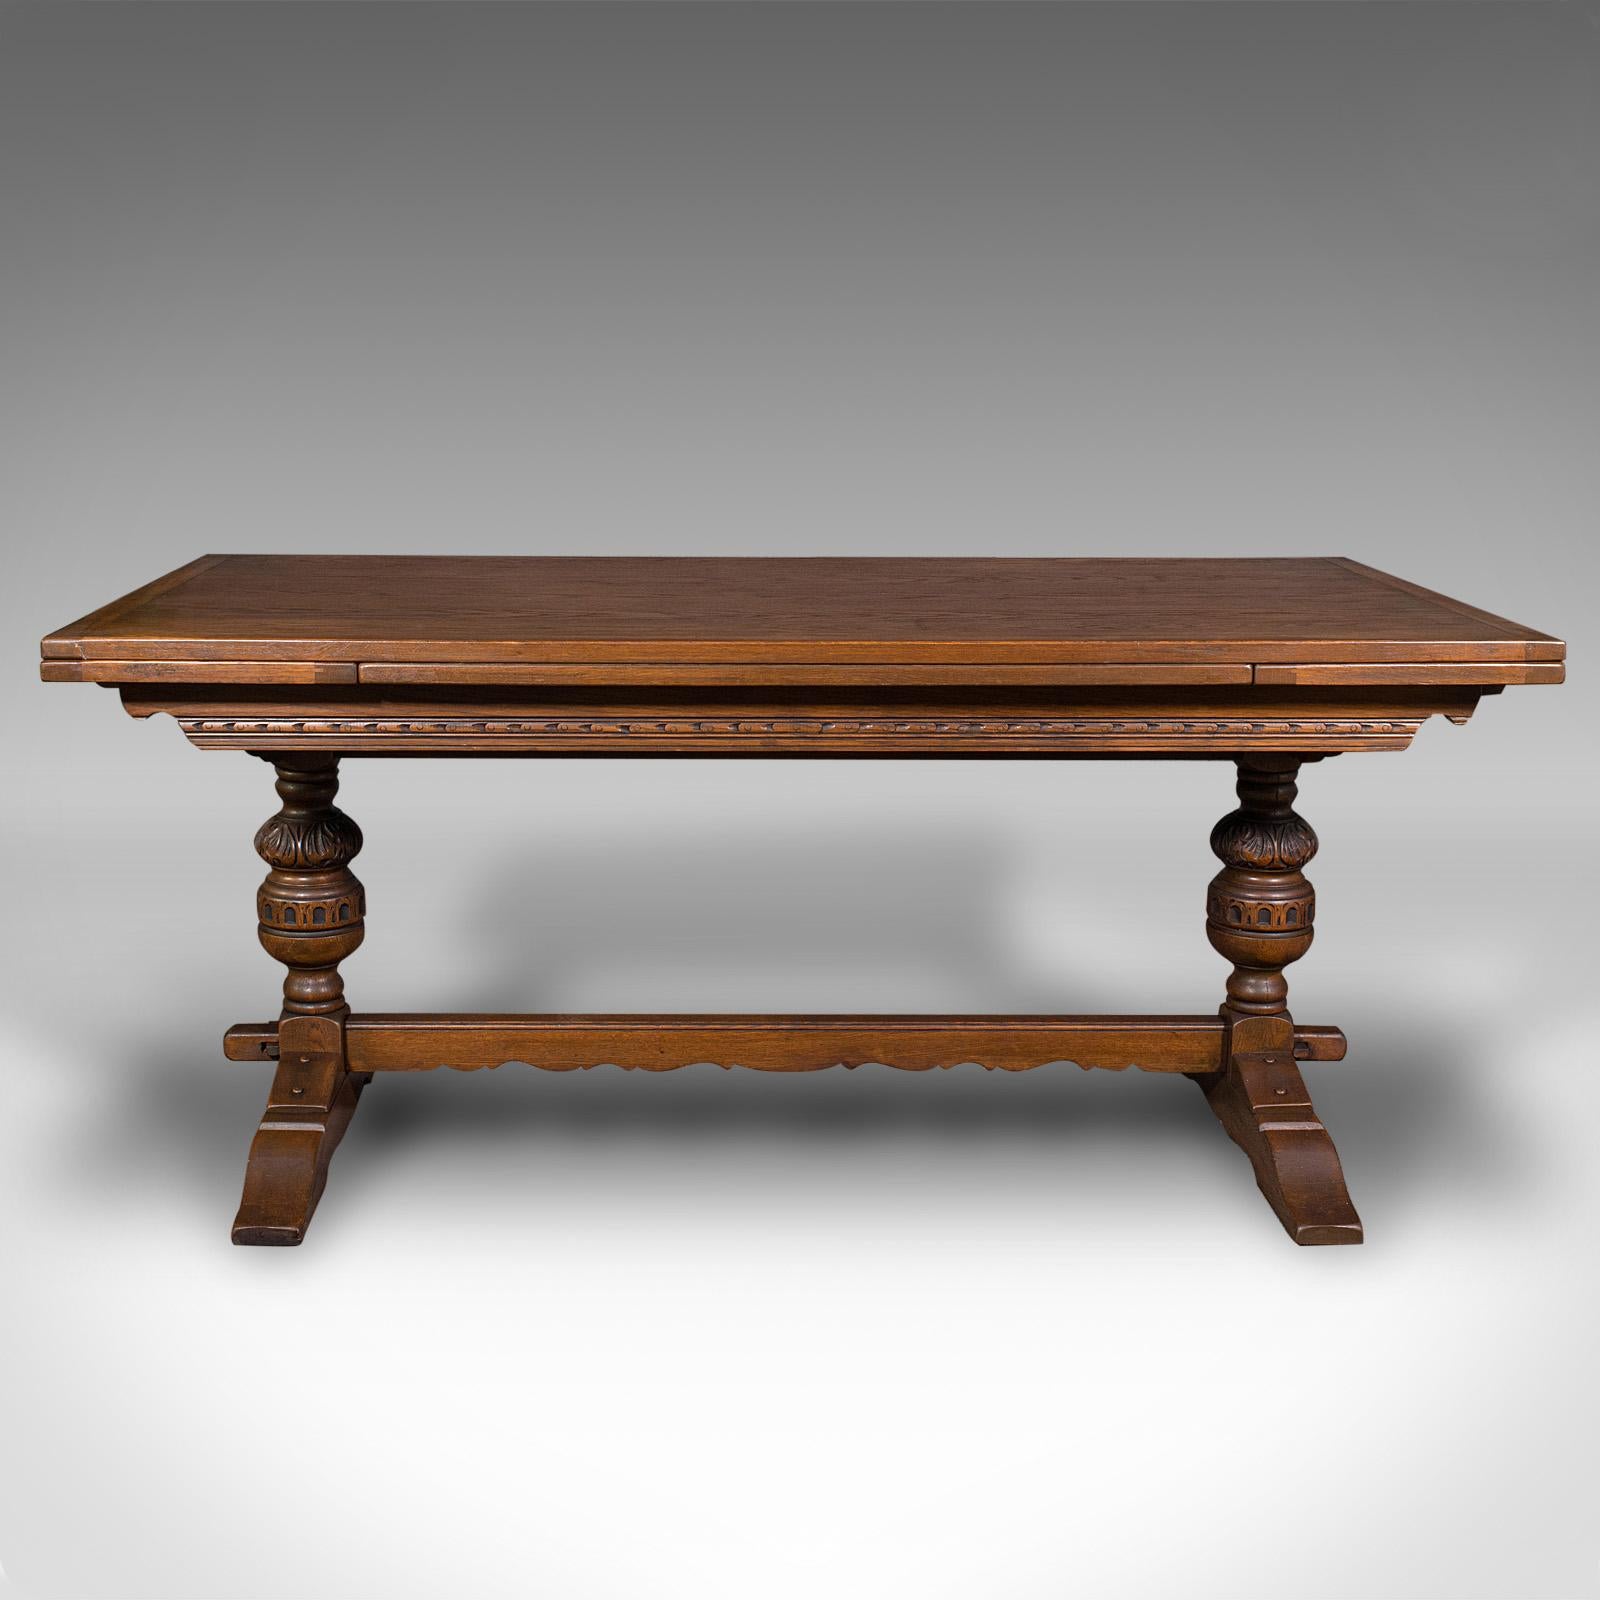 British Antique Extending Dining Table, English, Oak, 6-8 Seat, Country House, Edwardian